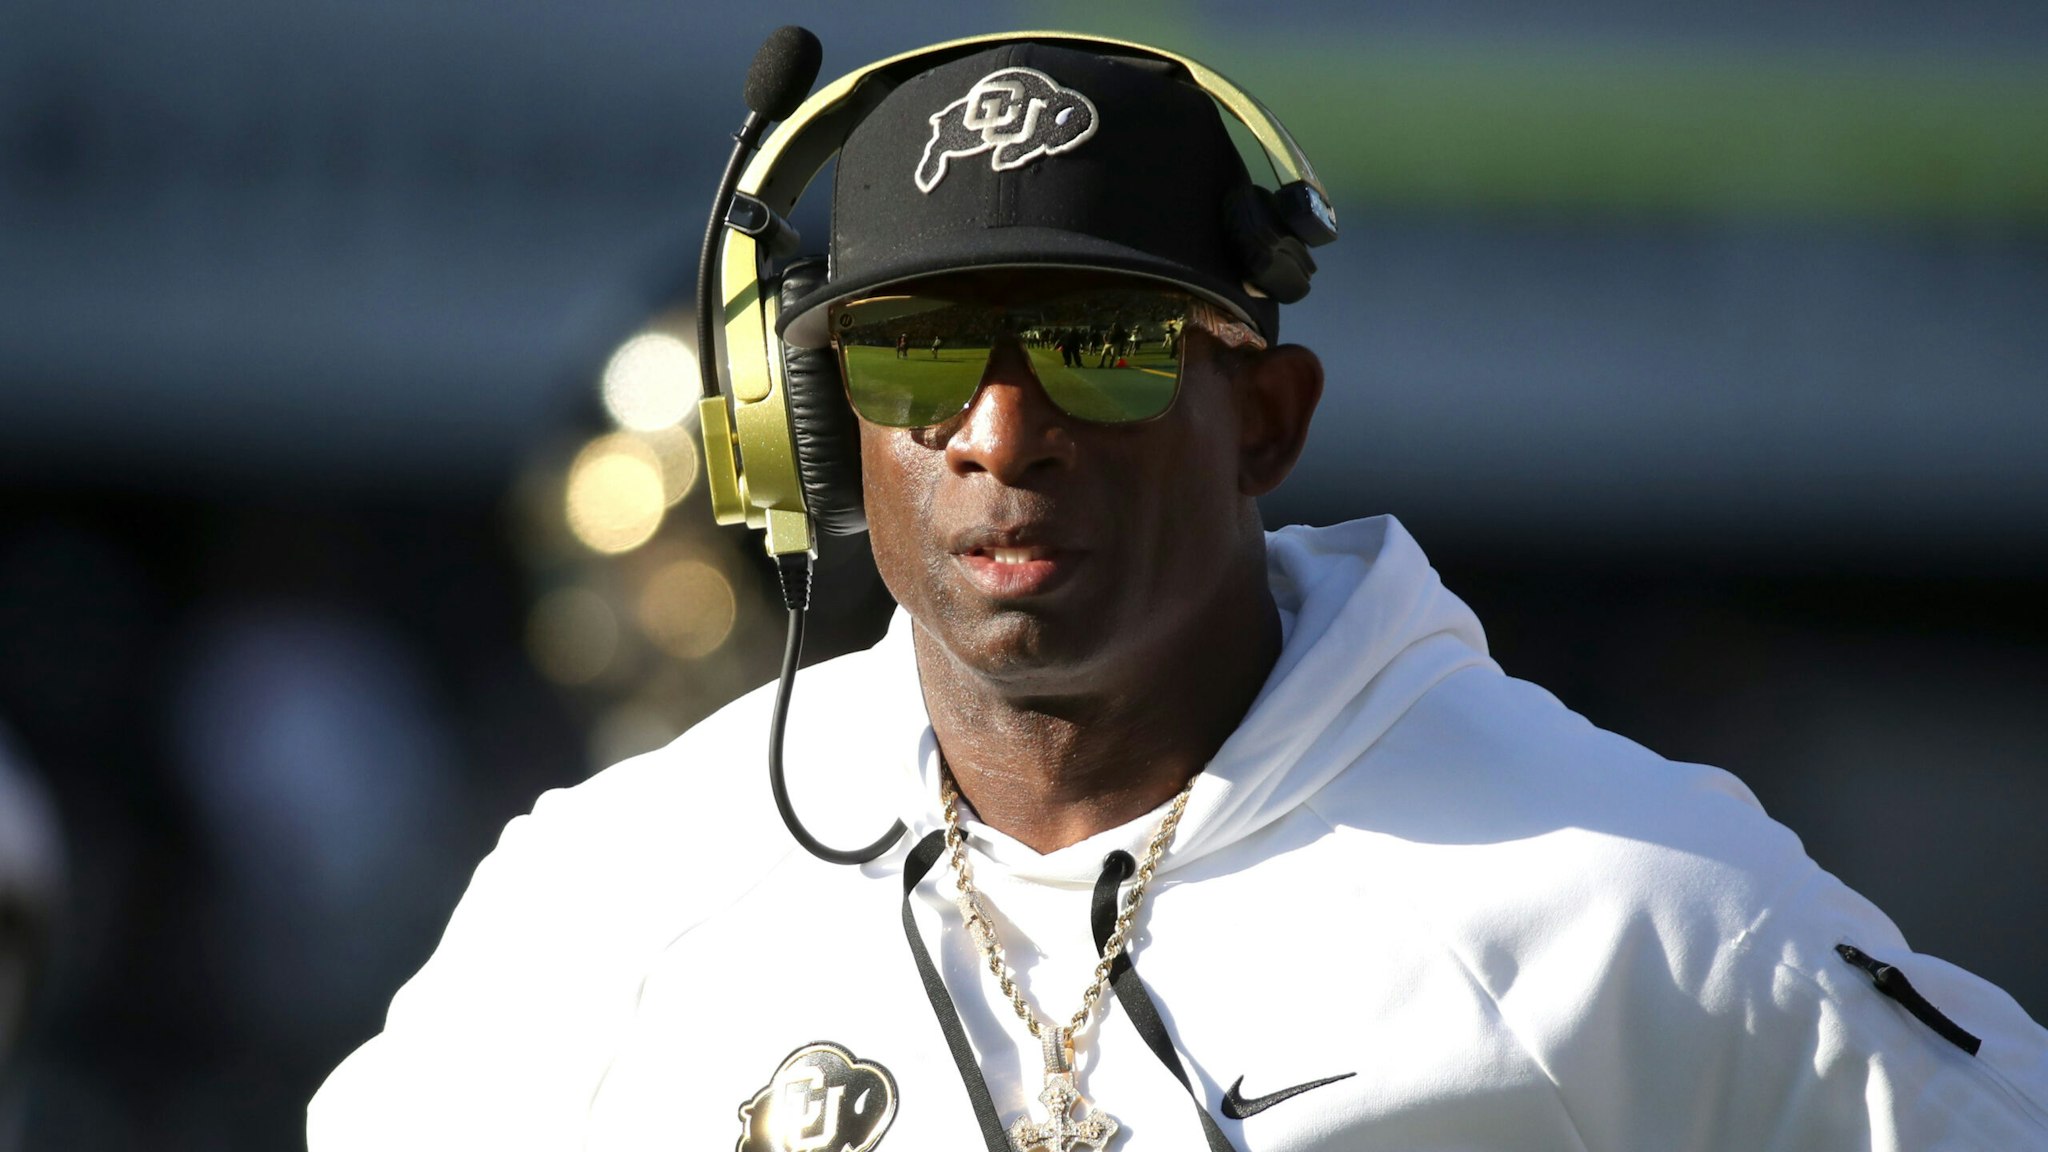 TEMPE, ARIZONA - OCTOBER 7: Head Coach Deion Sanders of the University of Colorado Buffs watches his team from the sidelines during the University of Colorado Buffs versus the Arizona State Sun Devils football game at Mountain America Stadium on October 7, 2023 in Tempe, Arizona.